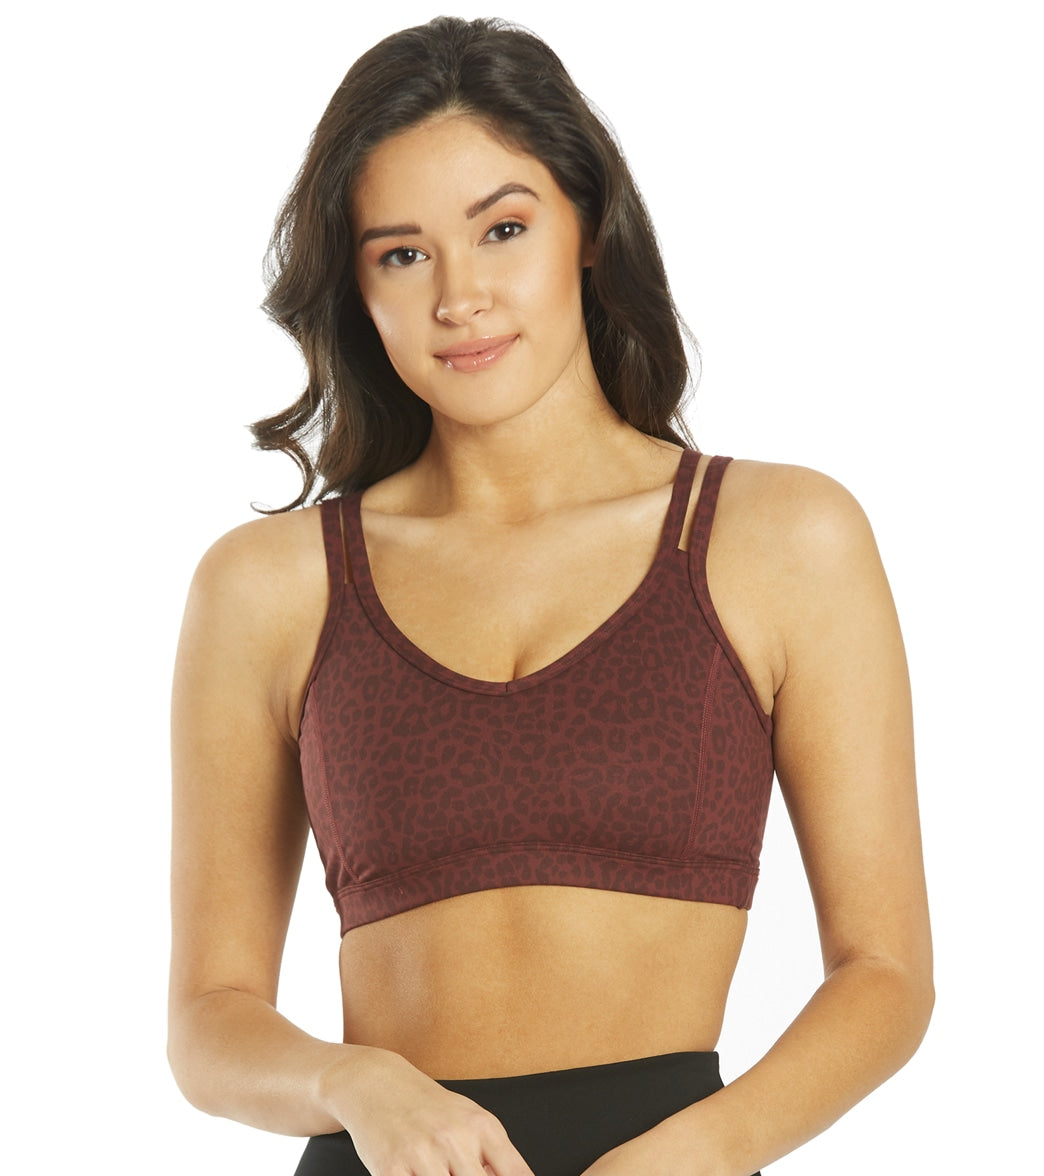 Everyday Yoga Radiant Cheetah Strappy Back Sports Bra at YogaOutlet.com –